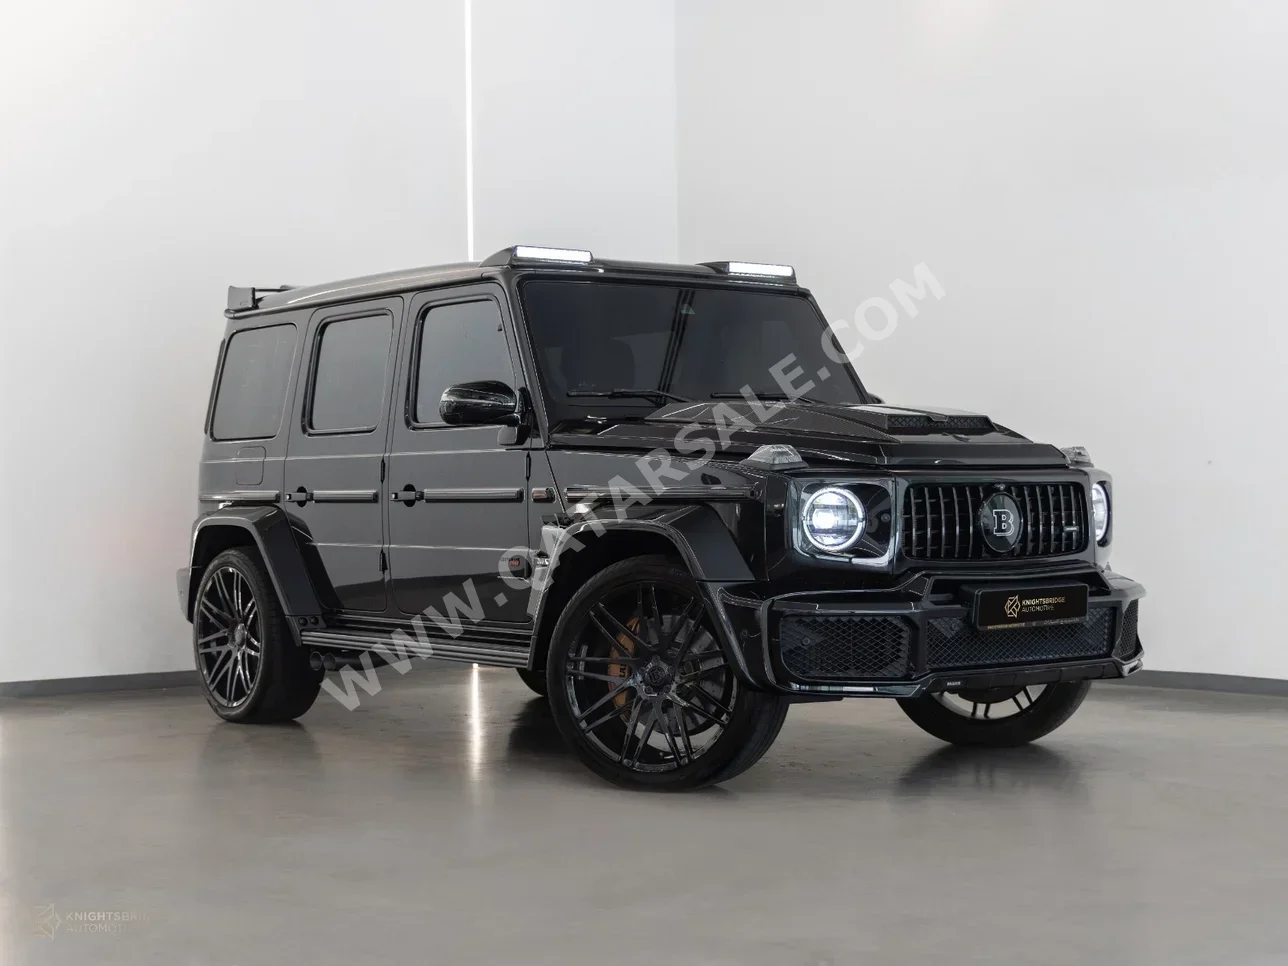 Mercedes-Benz  G-Class  800 Brabus  2019  Automatic  50,400 Km  8 Cylinder  Four Wheel Drive (4WD)  SUV  Black